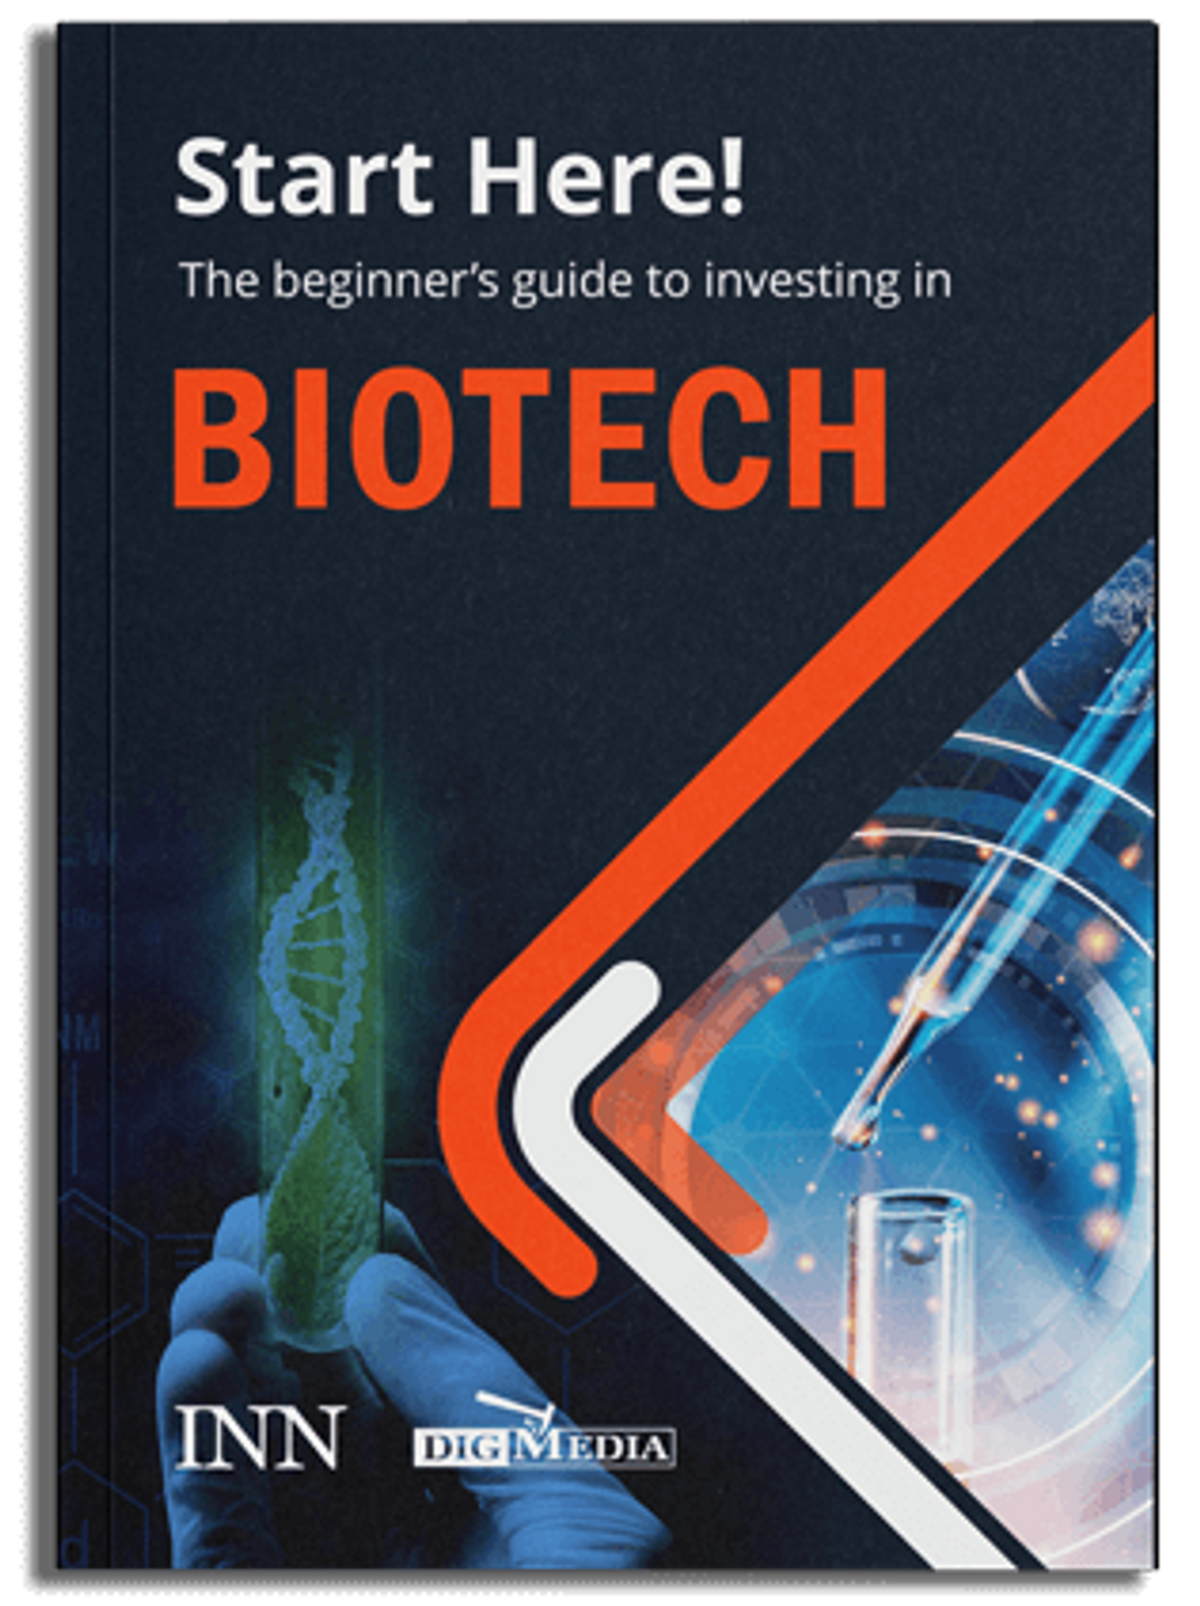  The Beginner's Guide to Investing In Biotech